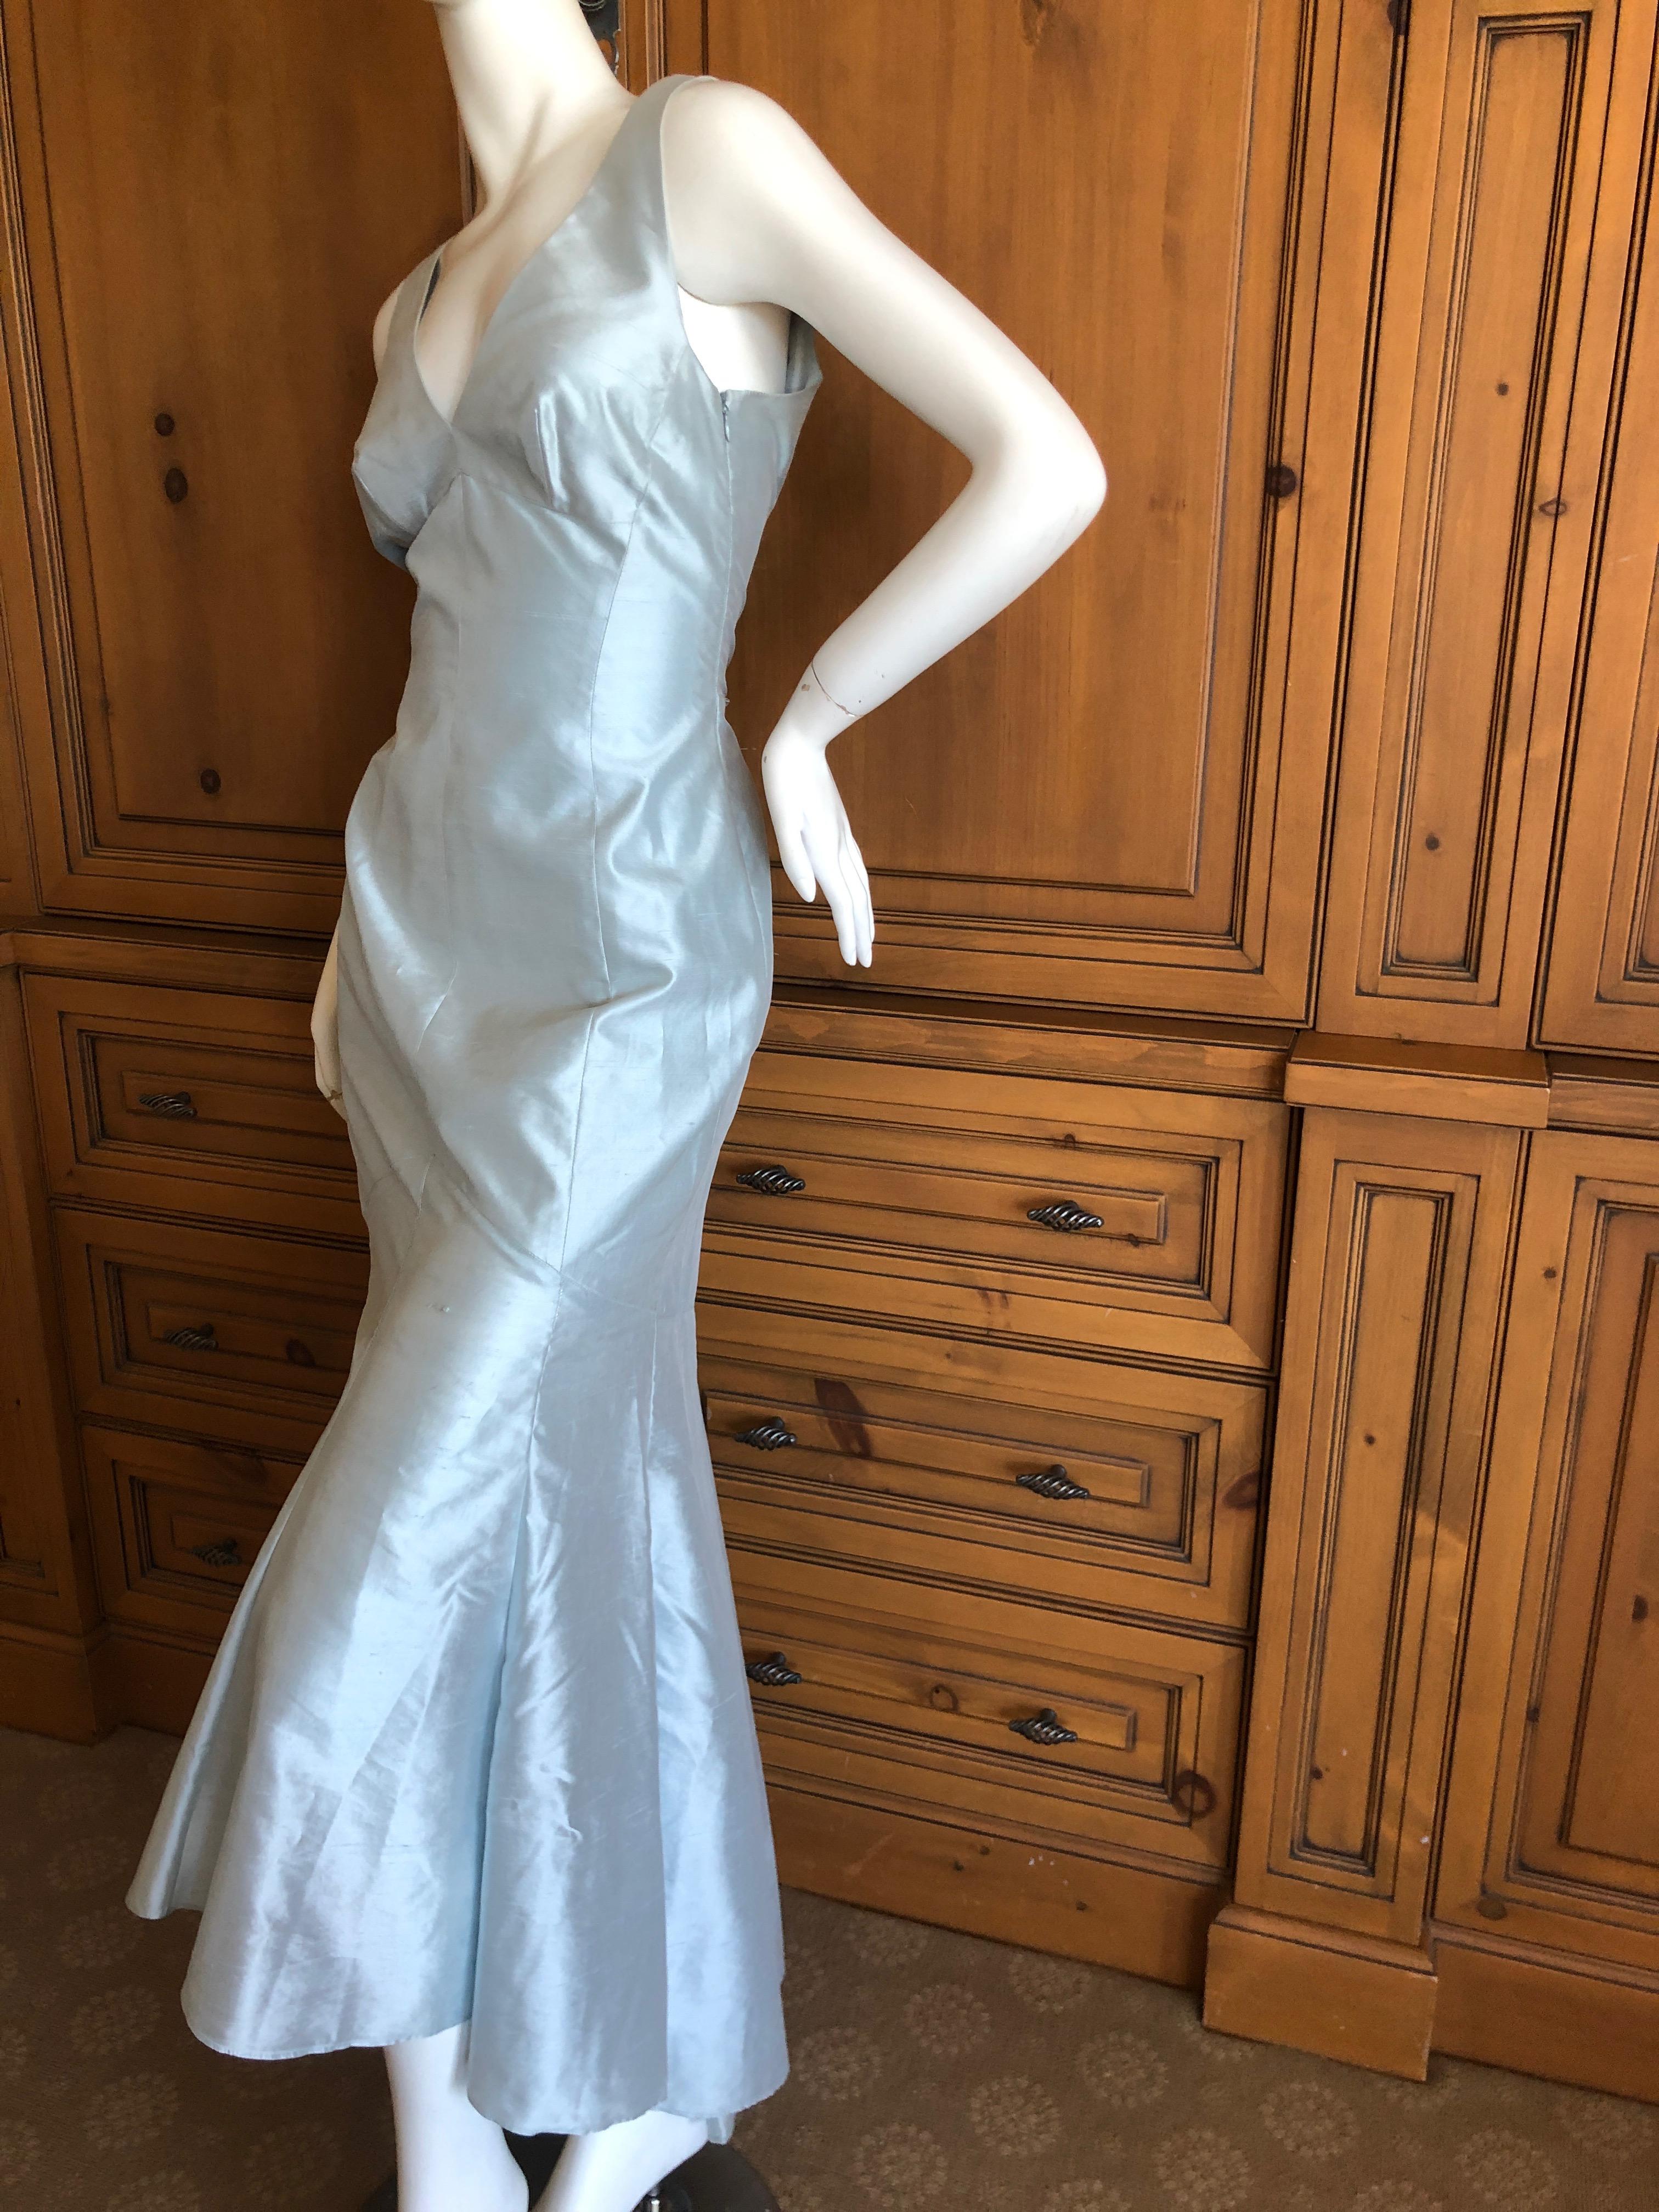 Thierry Mugler Couture Vintage 1980's Dupioni Silk Lace Up Back Evening Dress 
Beautiful baby blue dupioni silk evening dress with corset lacing and a high low hem, longer in the back.
Size 38
  Bust 36